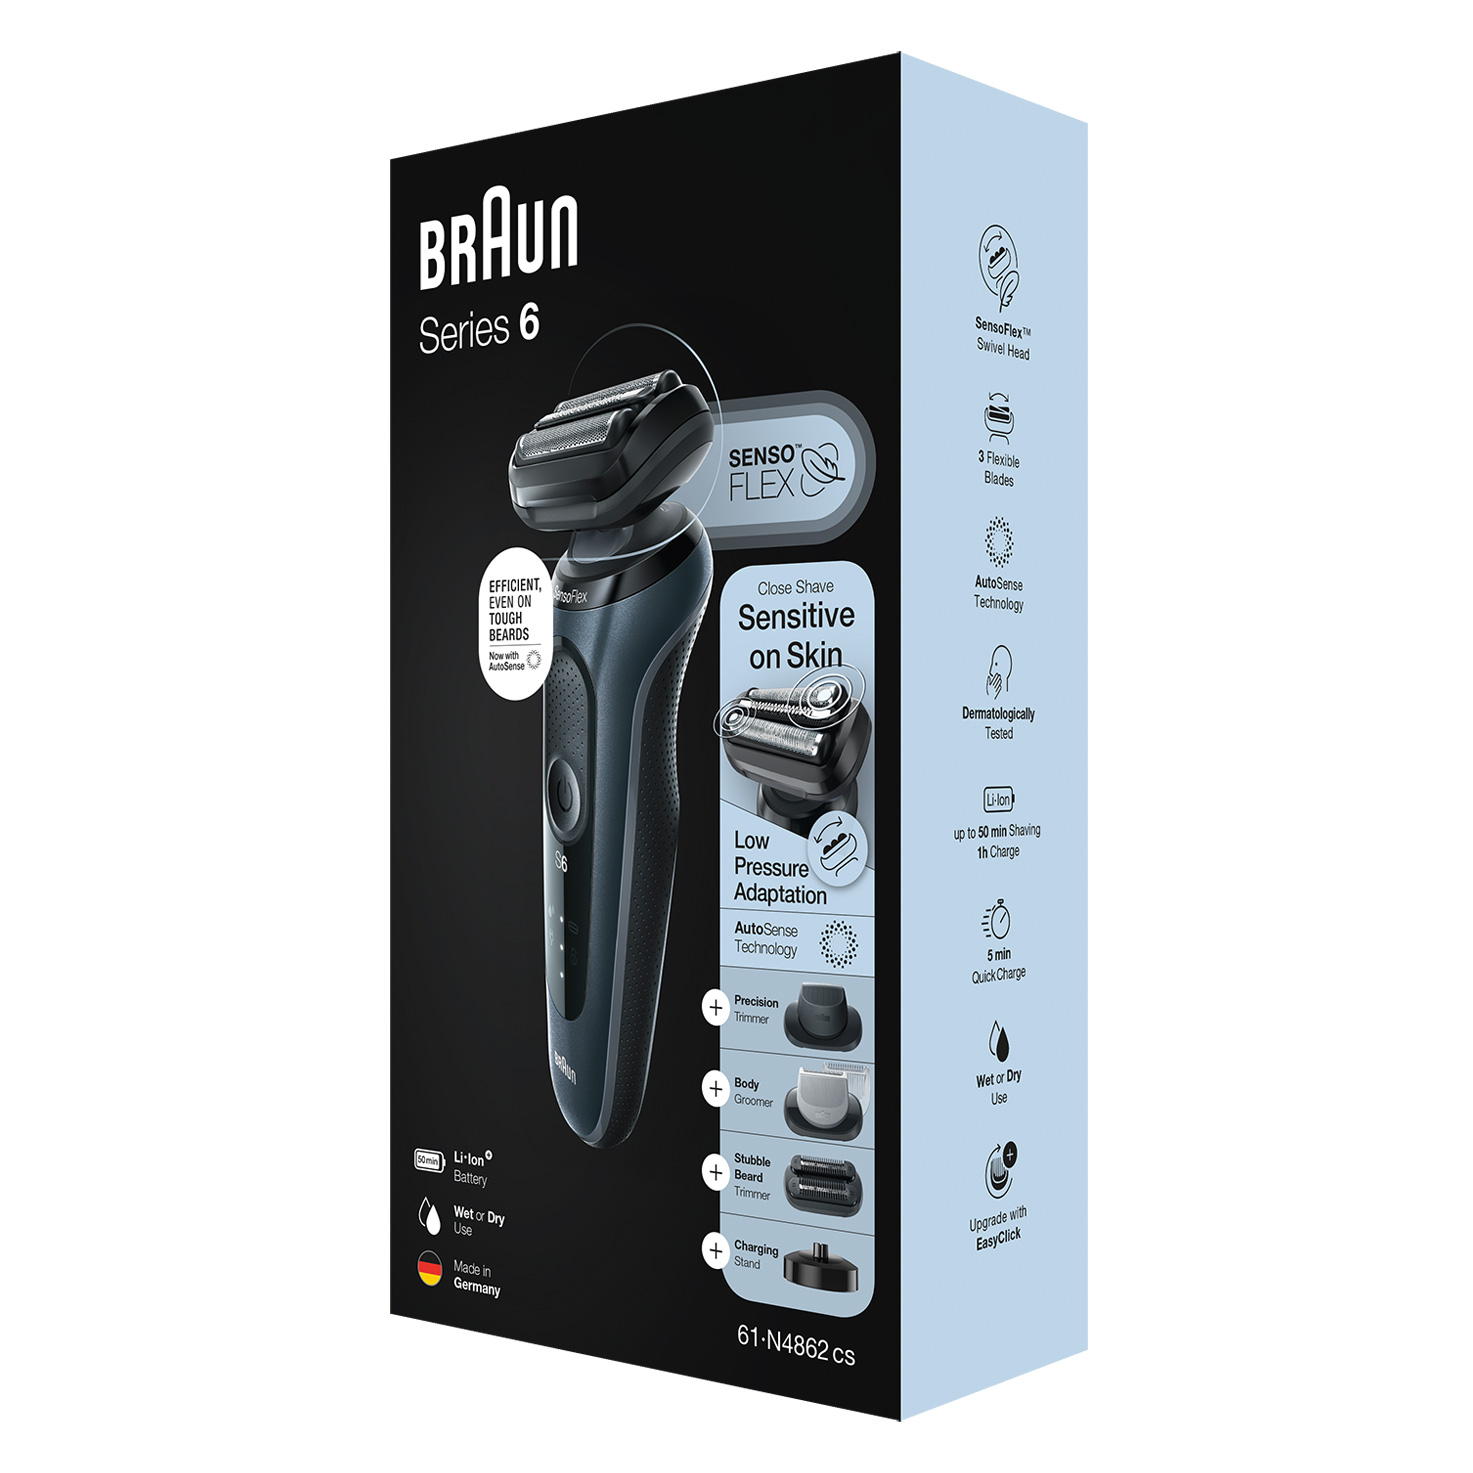 stand shaver Wet charging attachments, Dry grey. with SG & Series 3 61-N4862cs 6 and | Braun